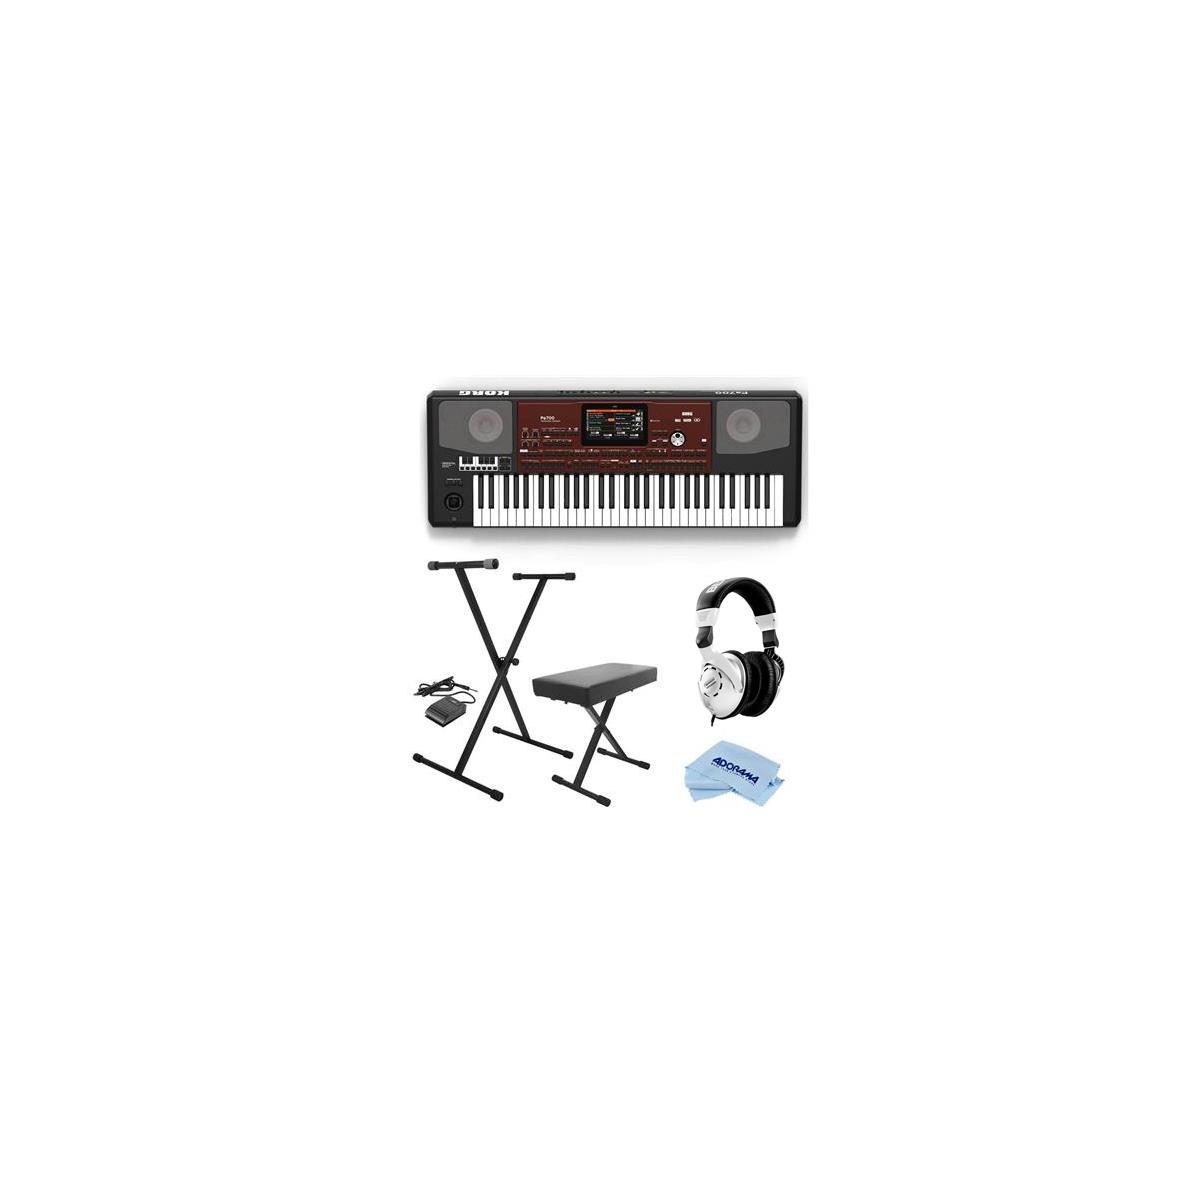 Korg Pa700 Oriental 61 Keys Velocity Pro Arranger Keyboard With Stand/Headphones -  PA700OR A